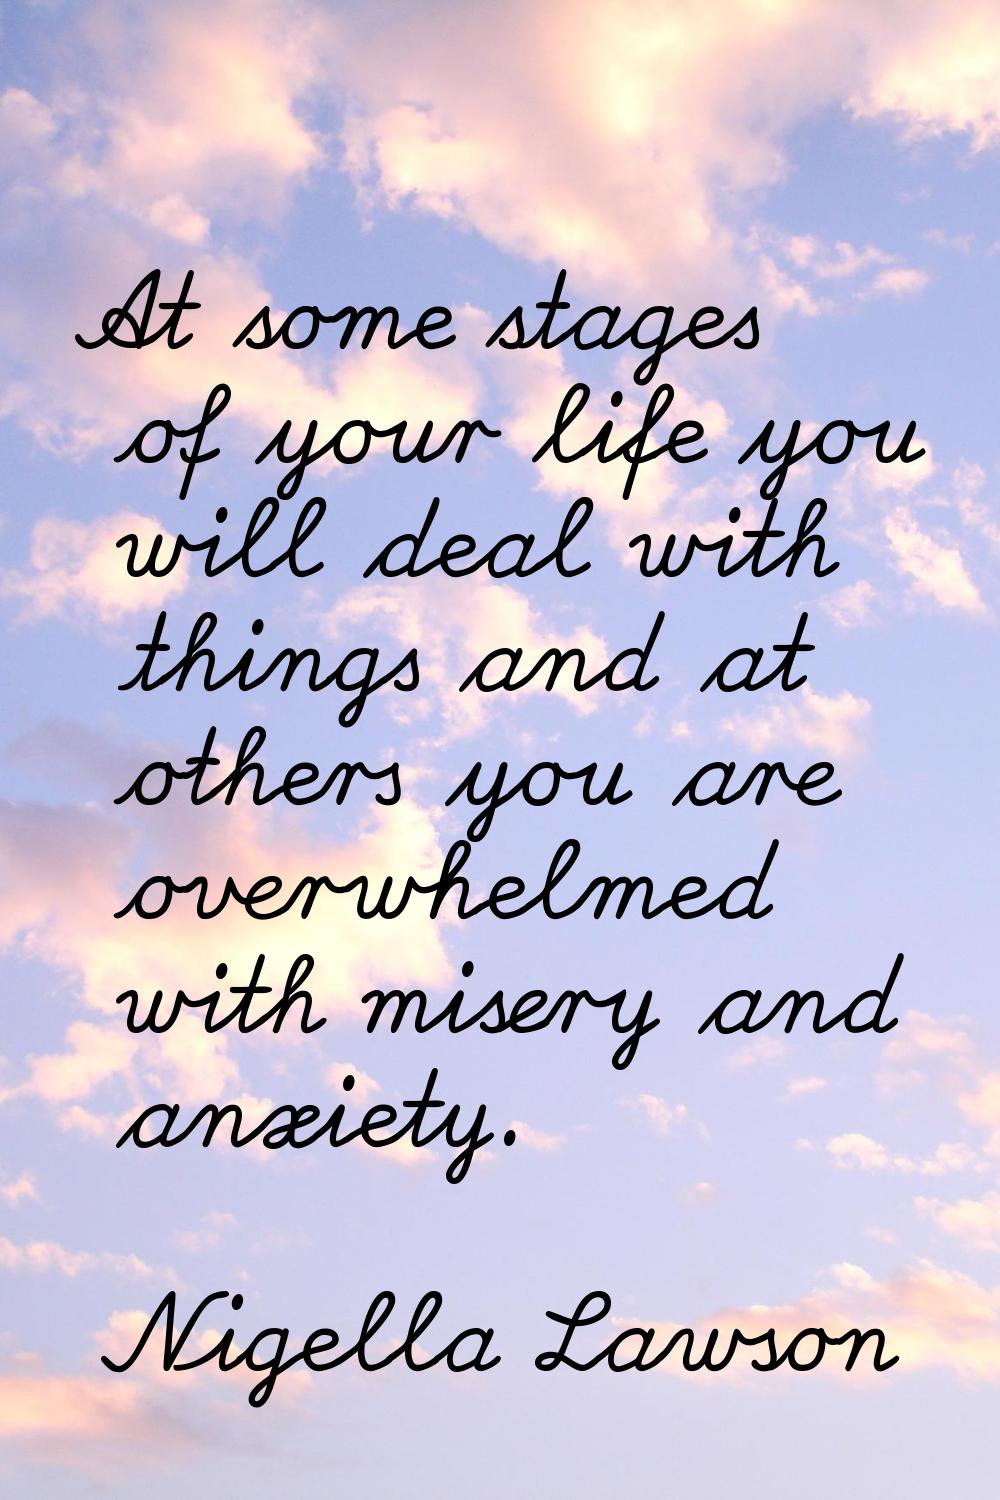 At some stages of your life you will deal with things and at others you are overwhelmed with misery